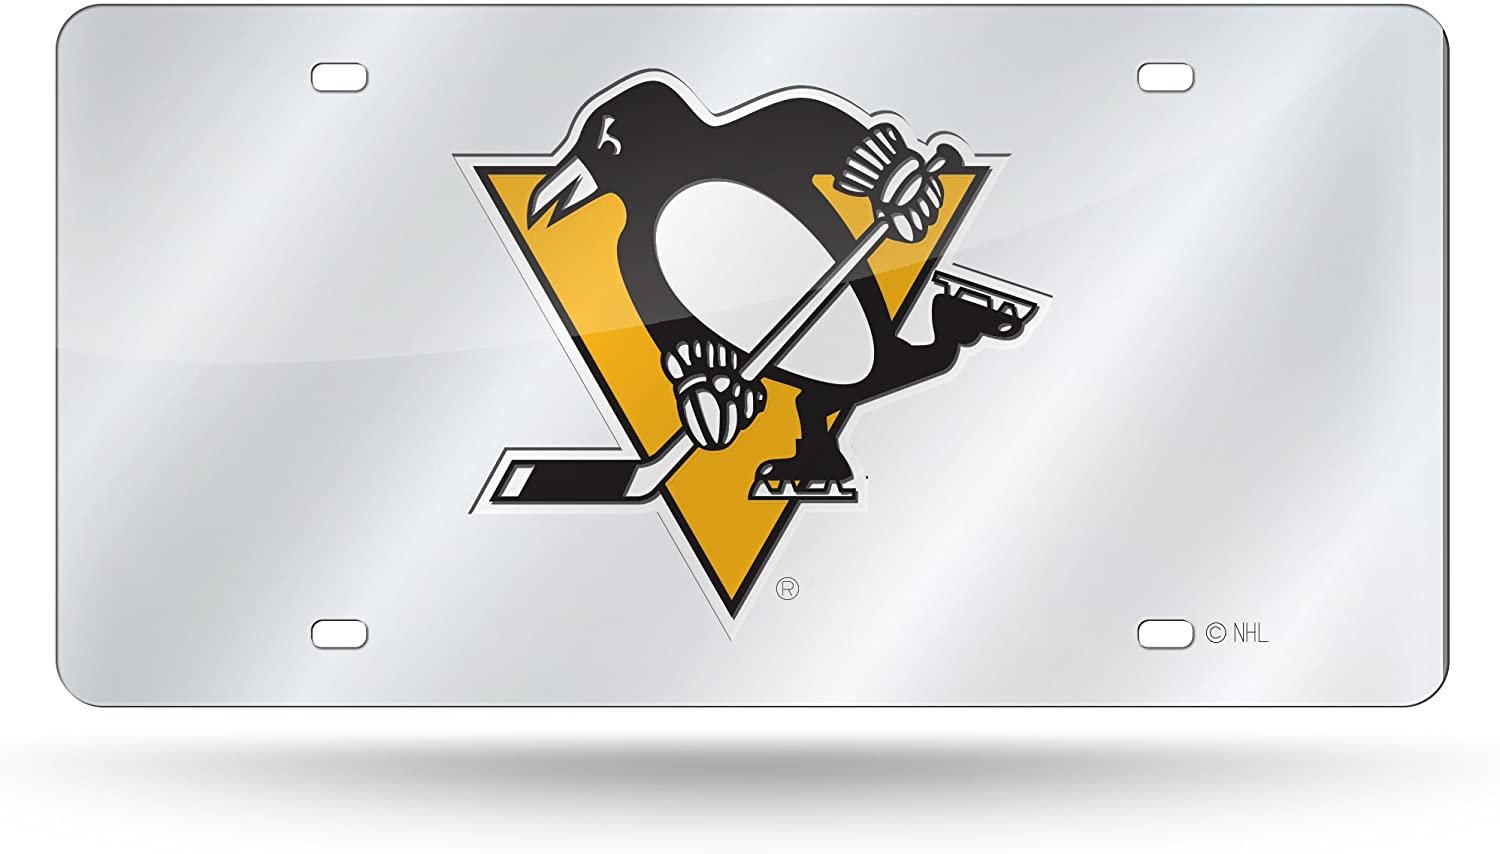 Pittsburgh Penguins Premium Laser Cut Tag License Plate, Mirrored Acrylic Inlaid, 12x6 Inch